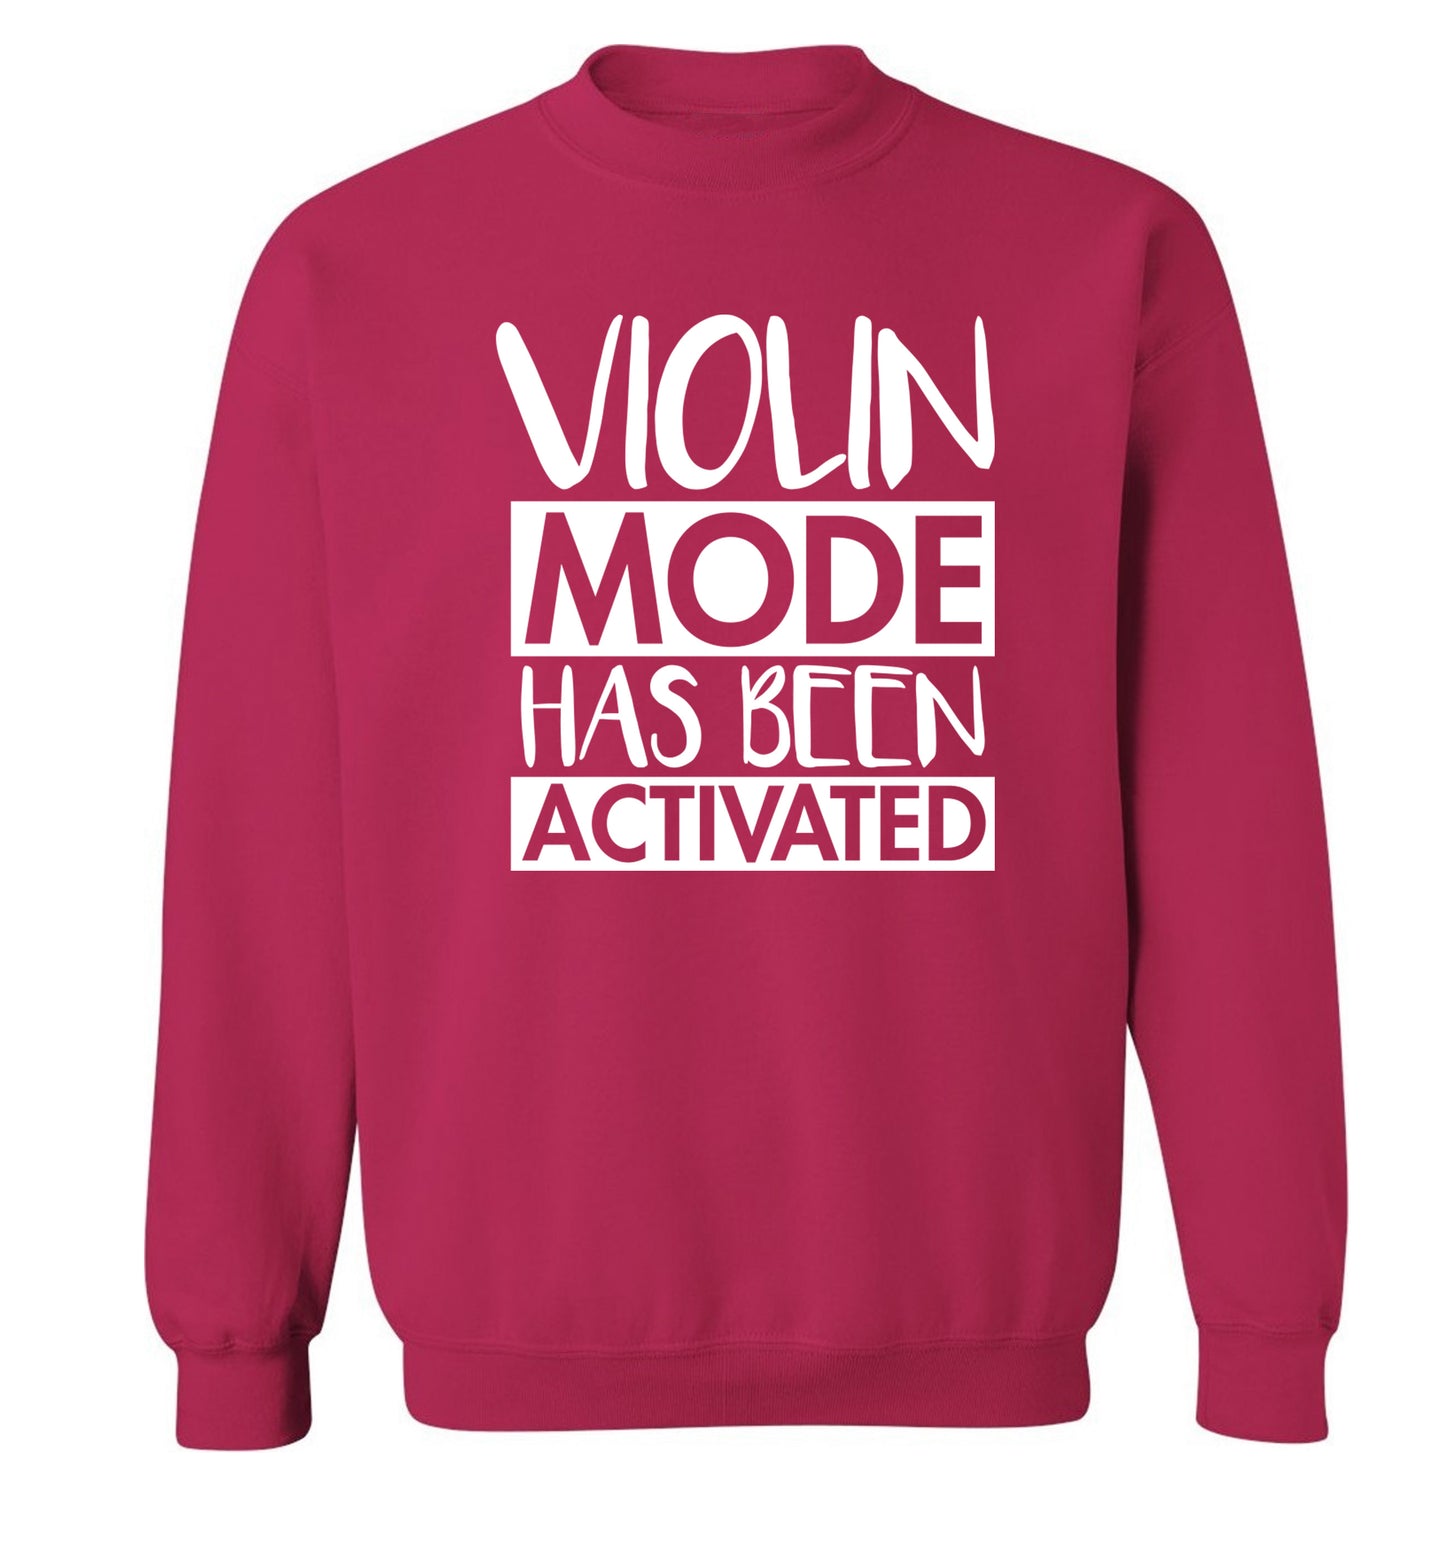 Violin Mode Activated Adult's unisex pink Sweater 2XL